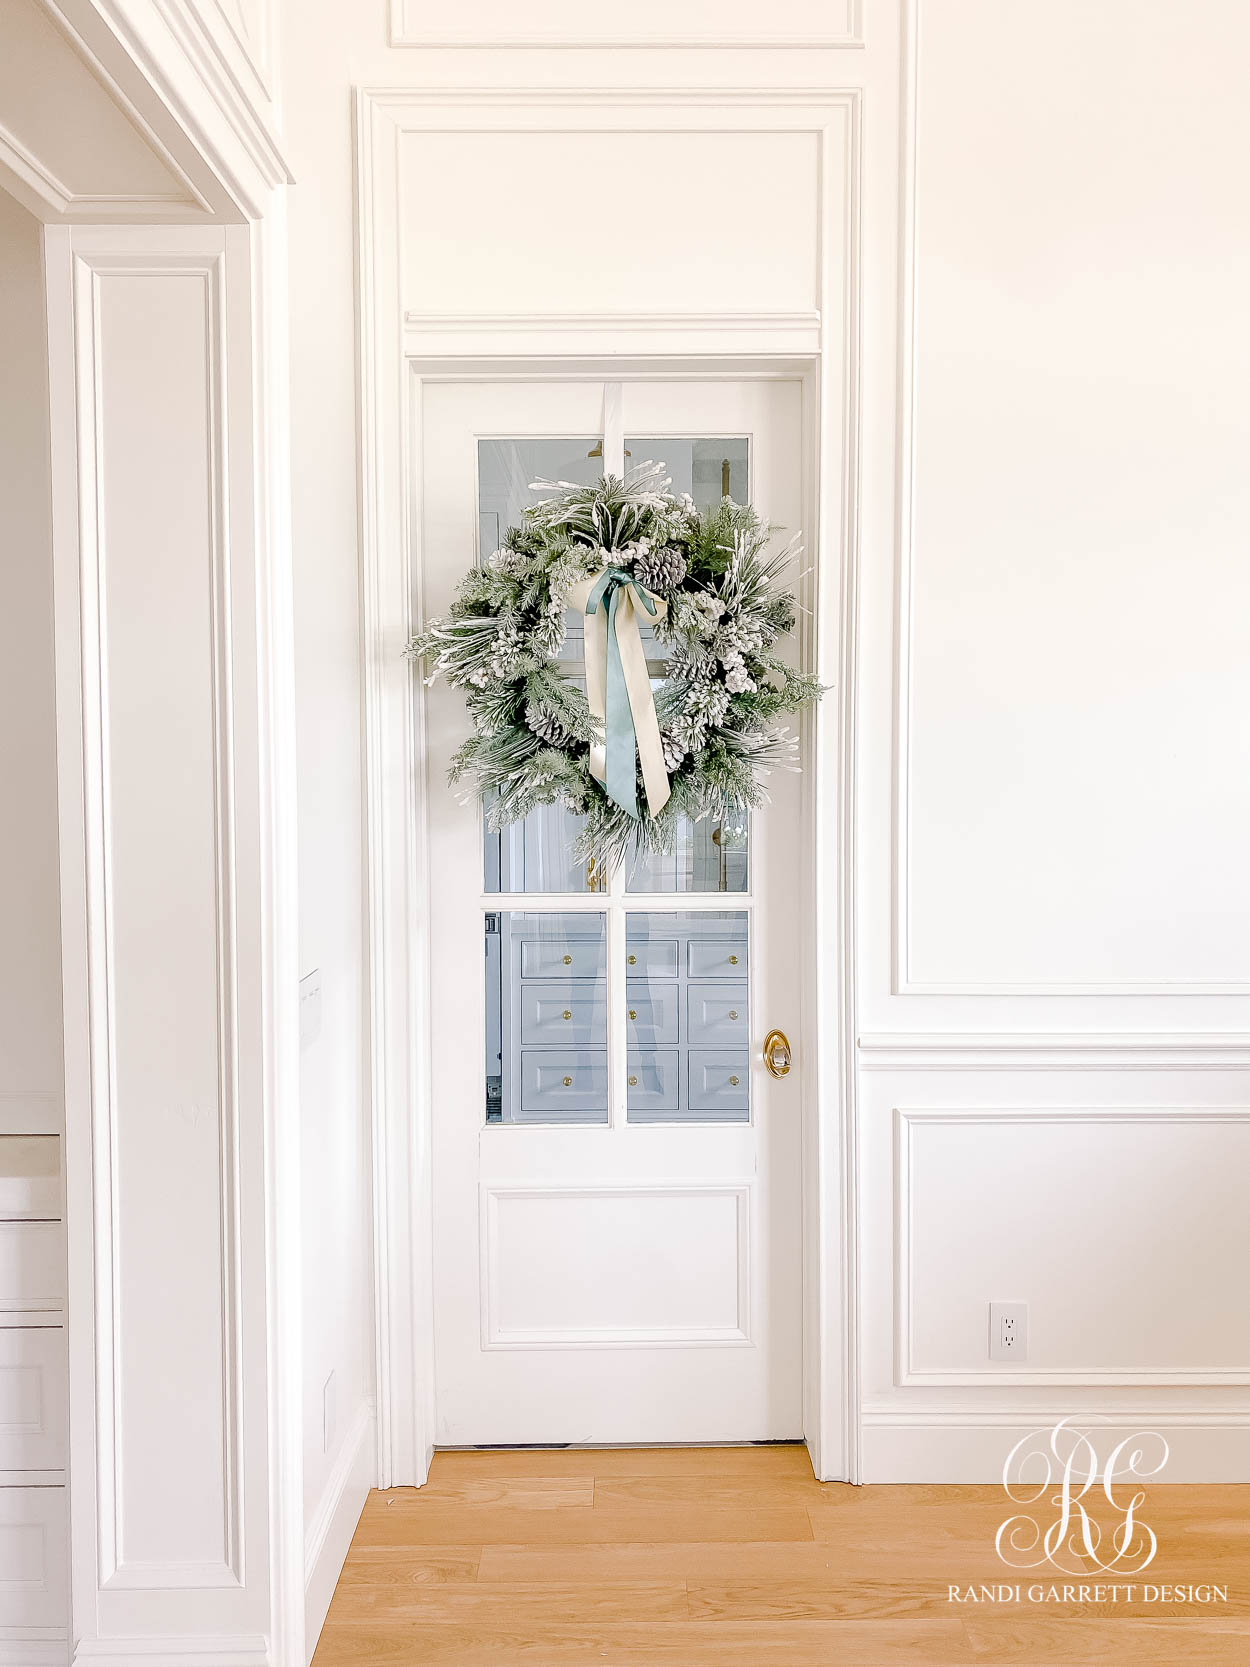 I'll be Home for Christmas Home Tour - Butler's Pantry